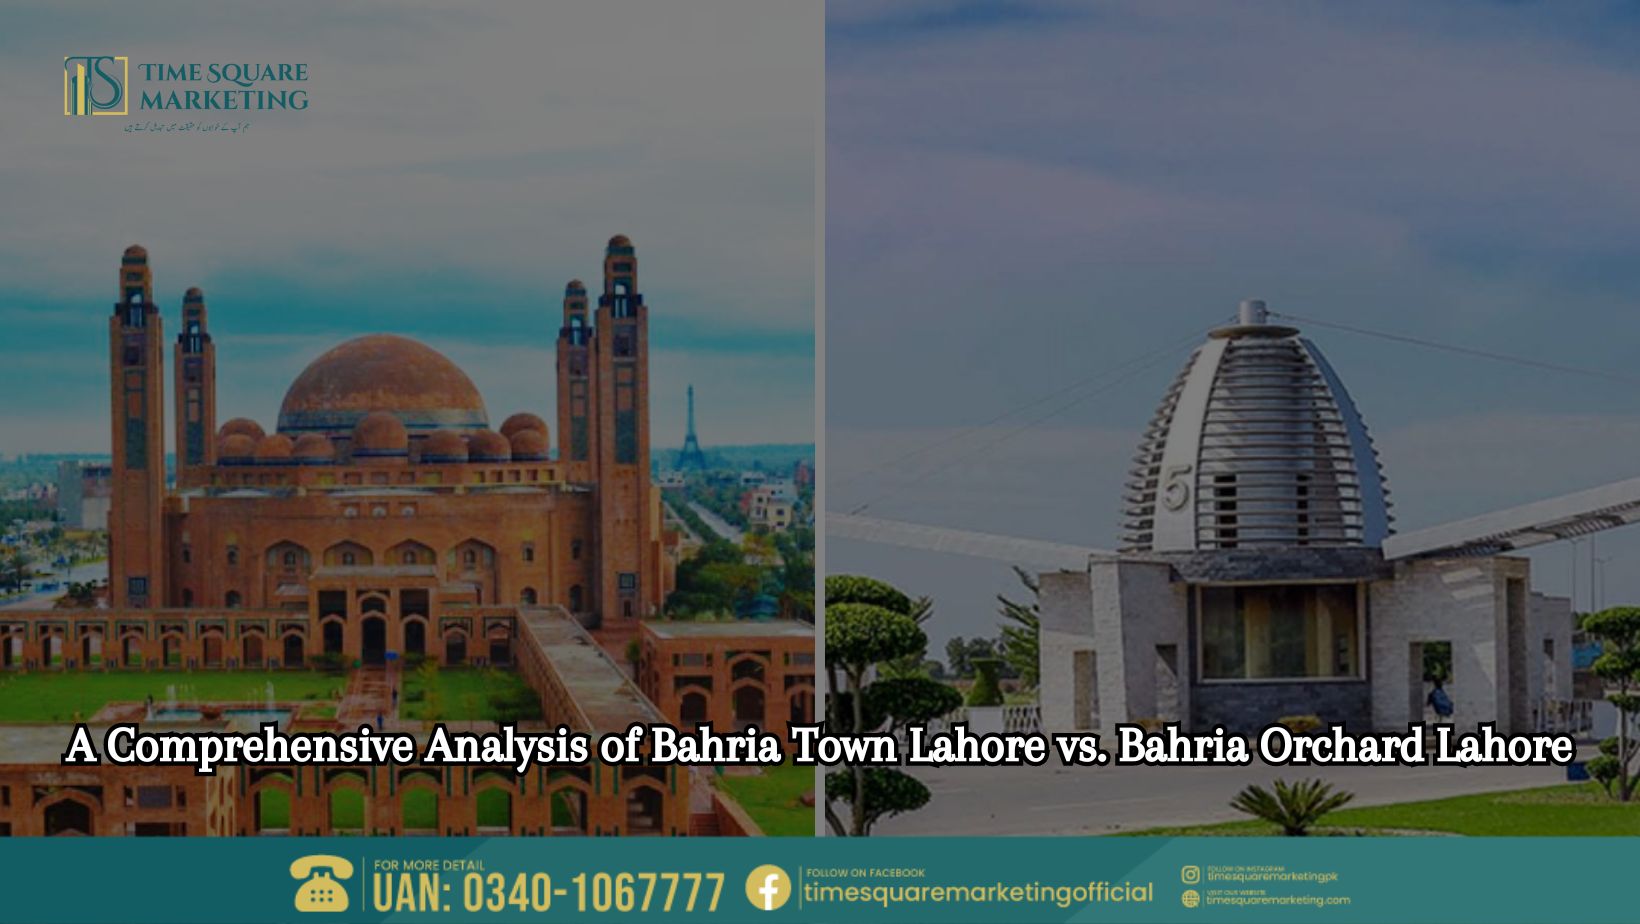 A Comprehensive Analysis of Bahria Town Lahore vs. Bahria Orchard Lahore